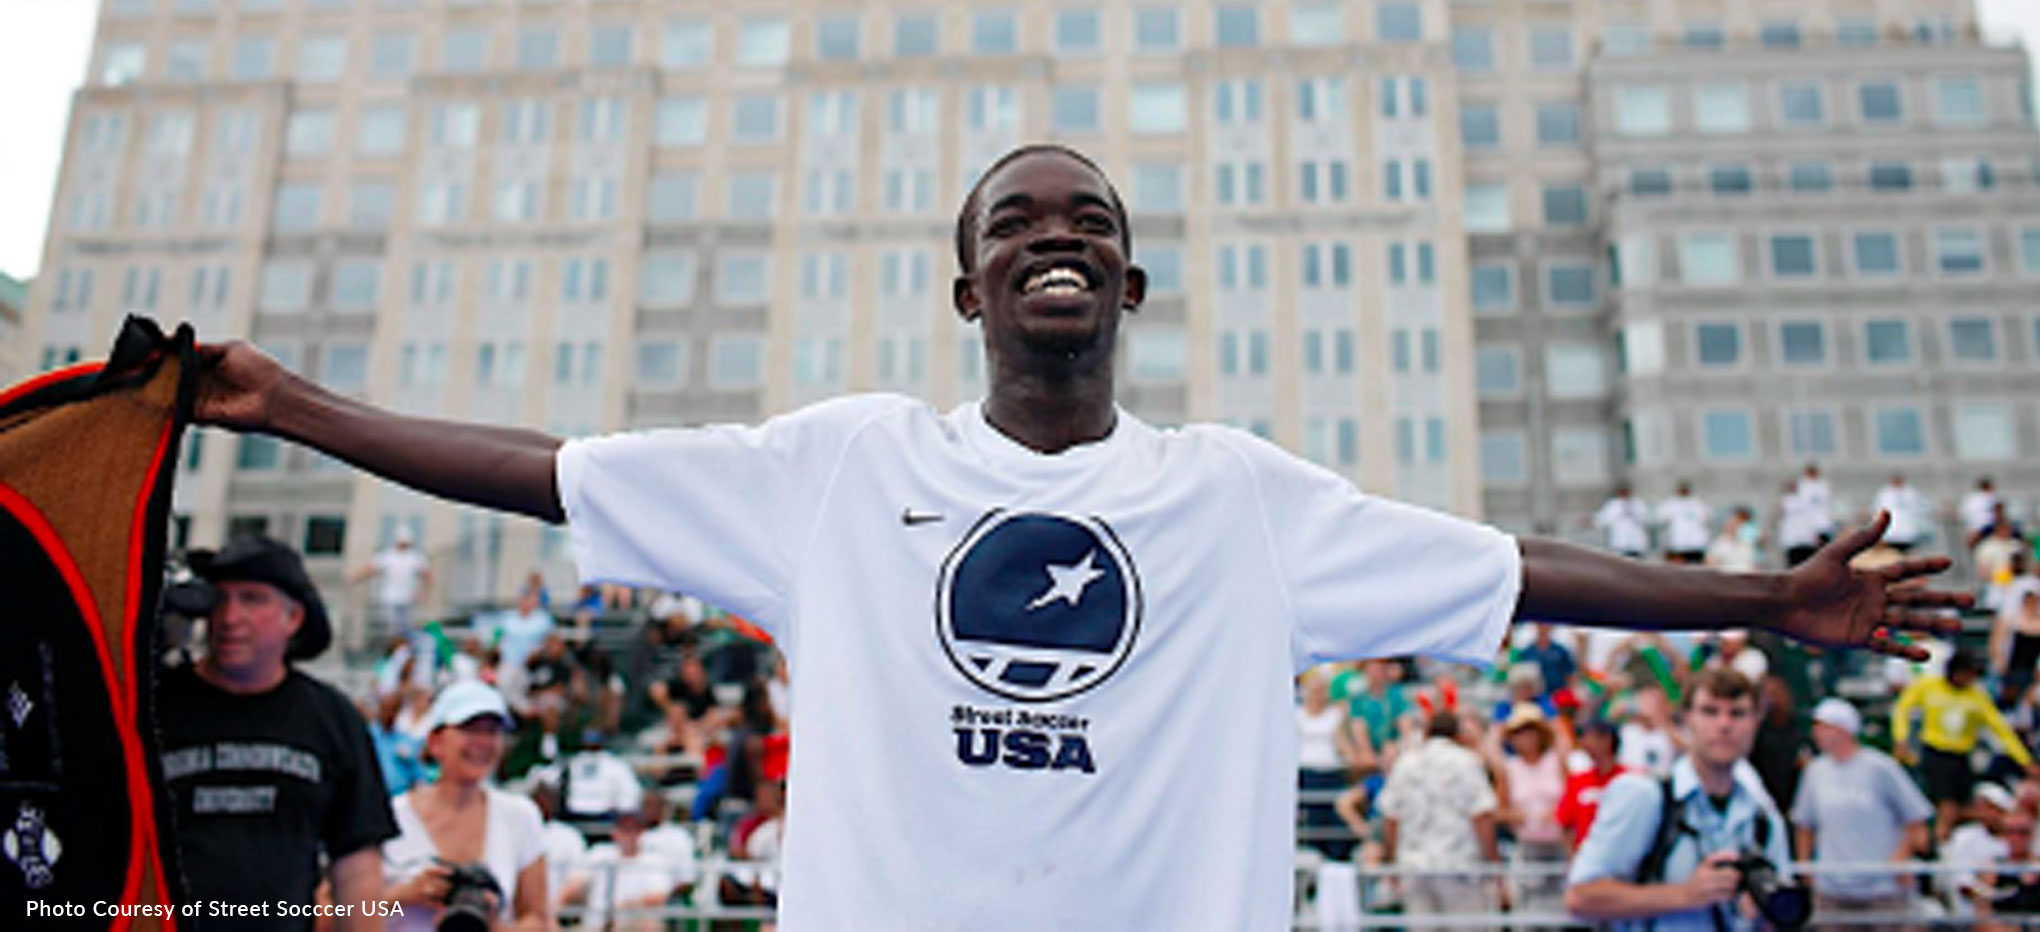 A web banner of a black teenage boy wearing a white tshirt with the logo of Street Soccer USA. He stands with his arms open triumphantly, smiling in front of a crowd of people in seats. Several photographers are in the background as well. The lower left of the image contains an accreditation Courtesy of Street Soccer USA.